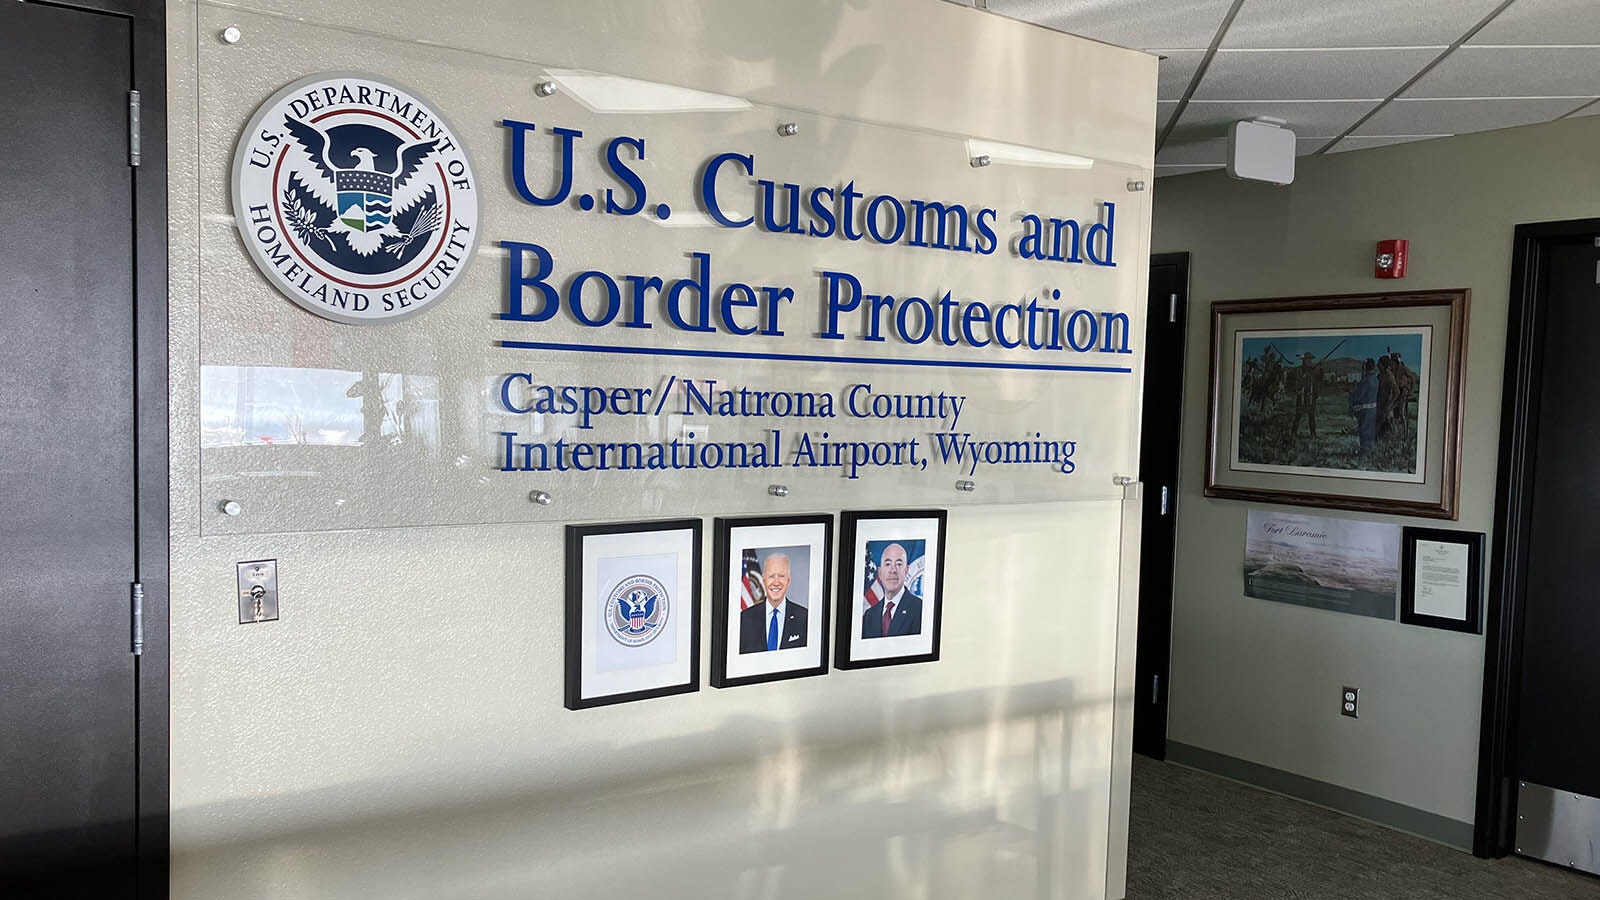 The U.S. Customs and Border Protection office in Casper is available 24/7 due to its officer’s philosophy on customer service.